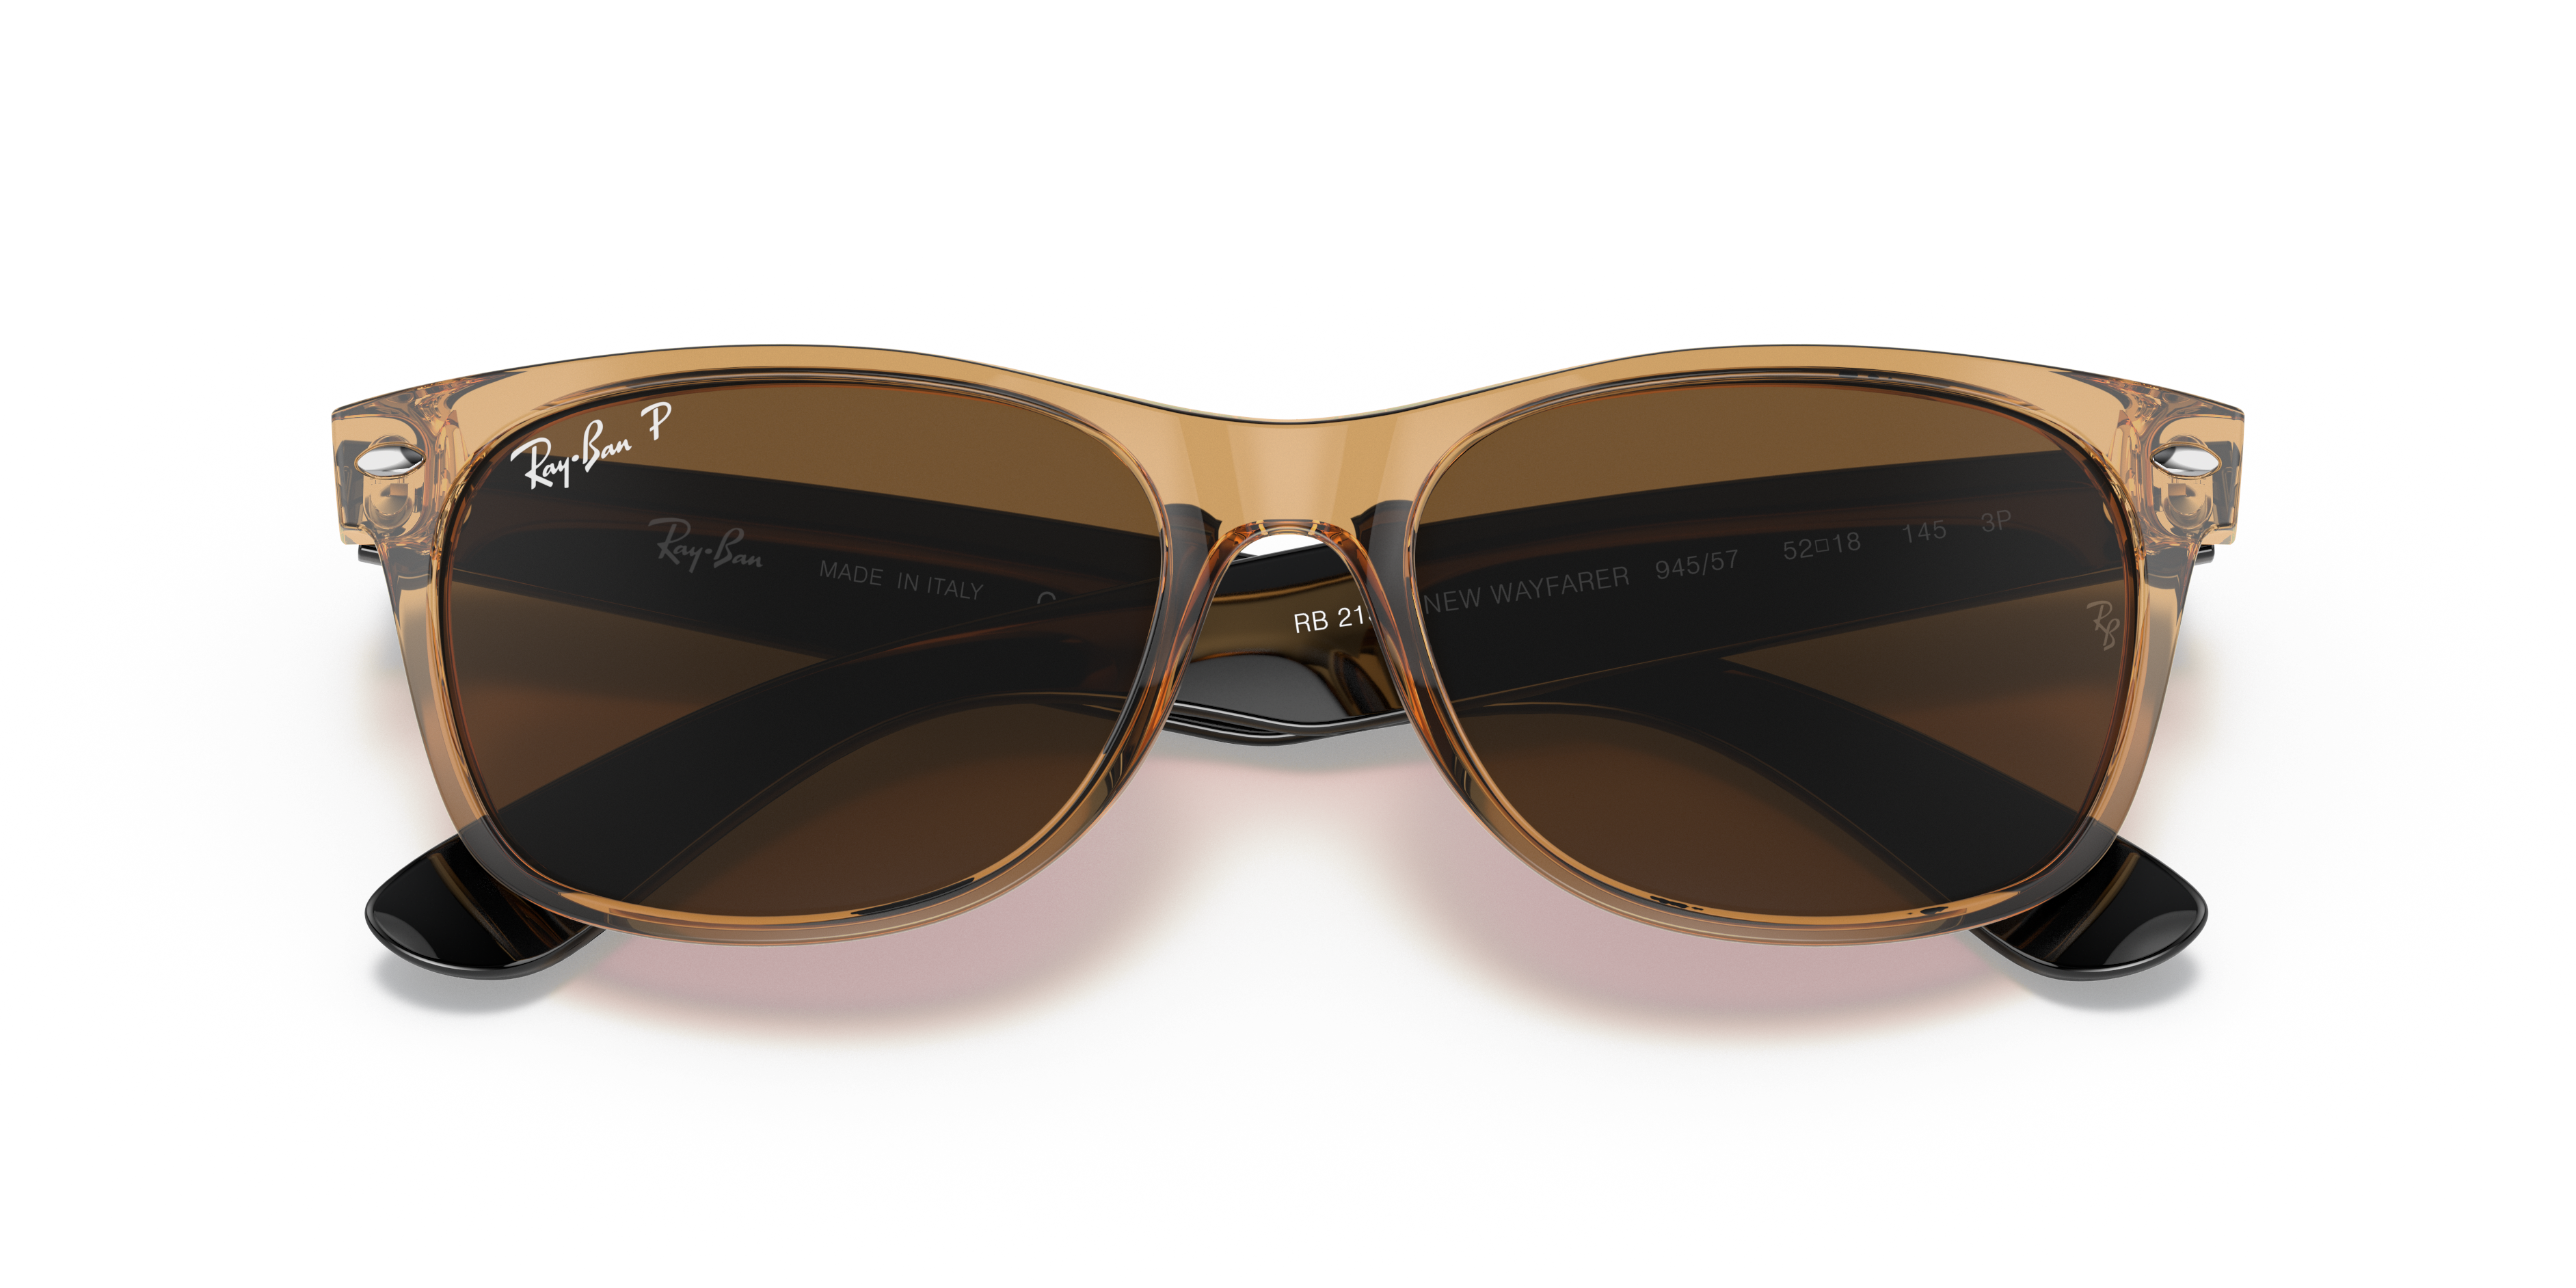 ray ban standard size in mm